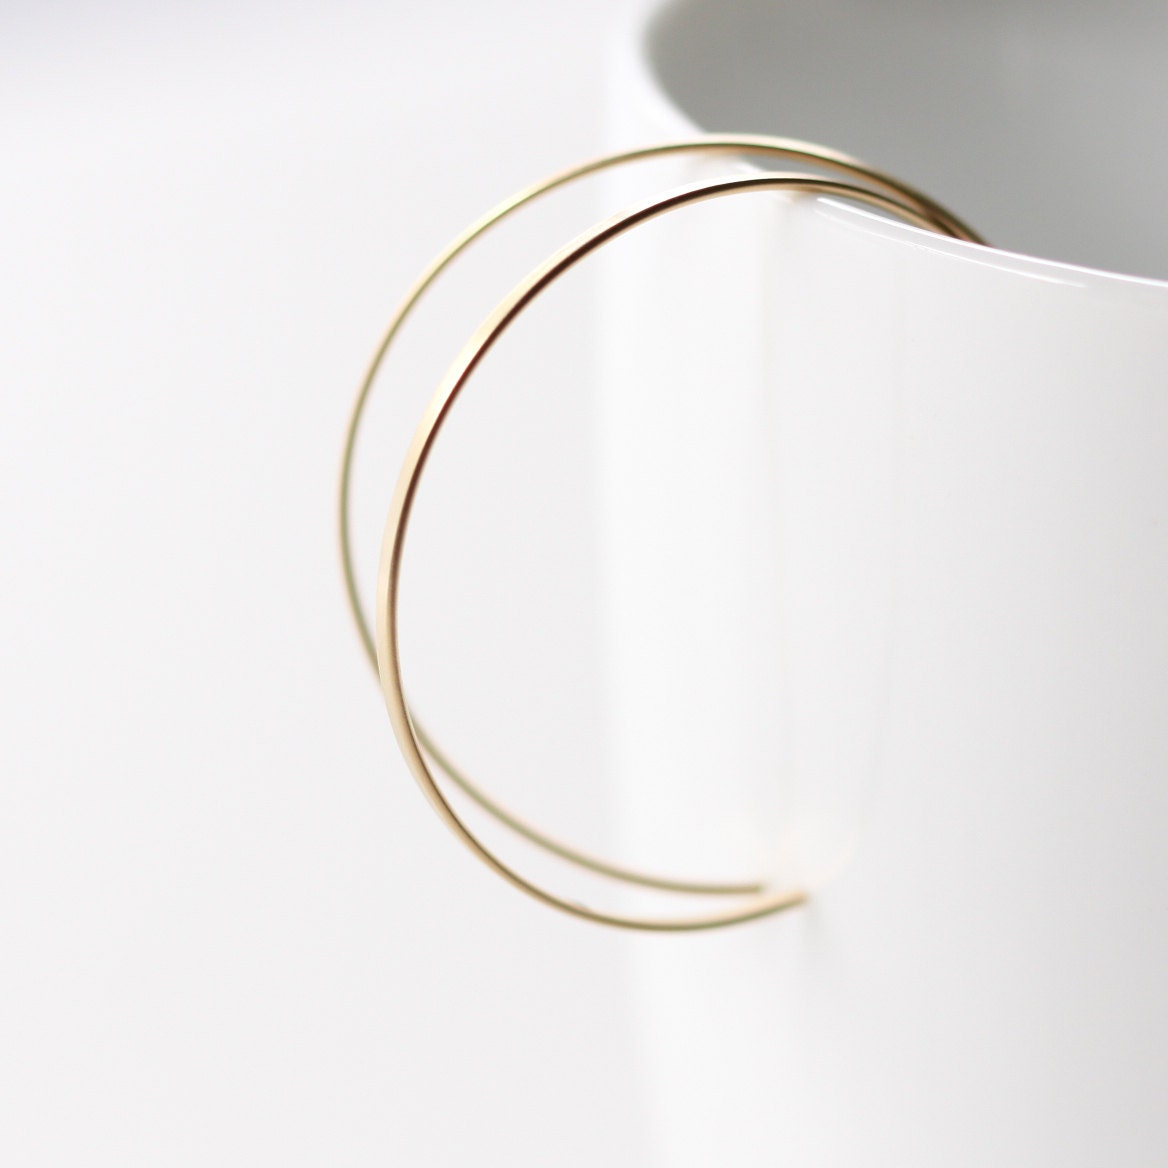 Unfussy and sleek solid 14K yellow gold hoops of flattened wire with a modern and simple, yet commanding aesthetic  - "Anneli Earrings" - bluehourdesigns